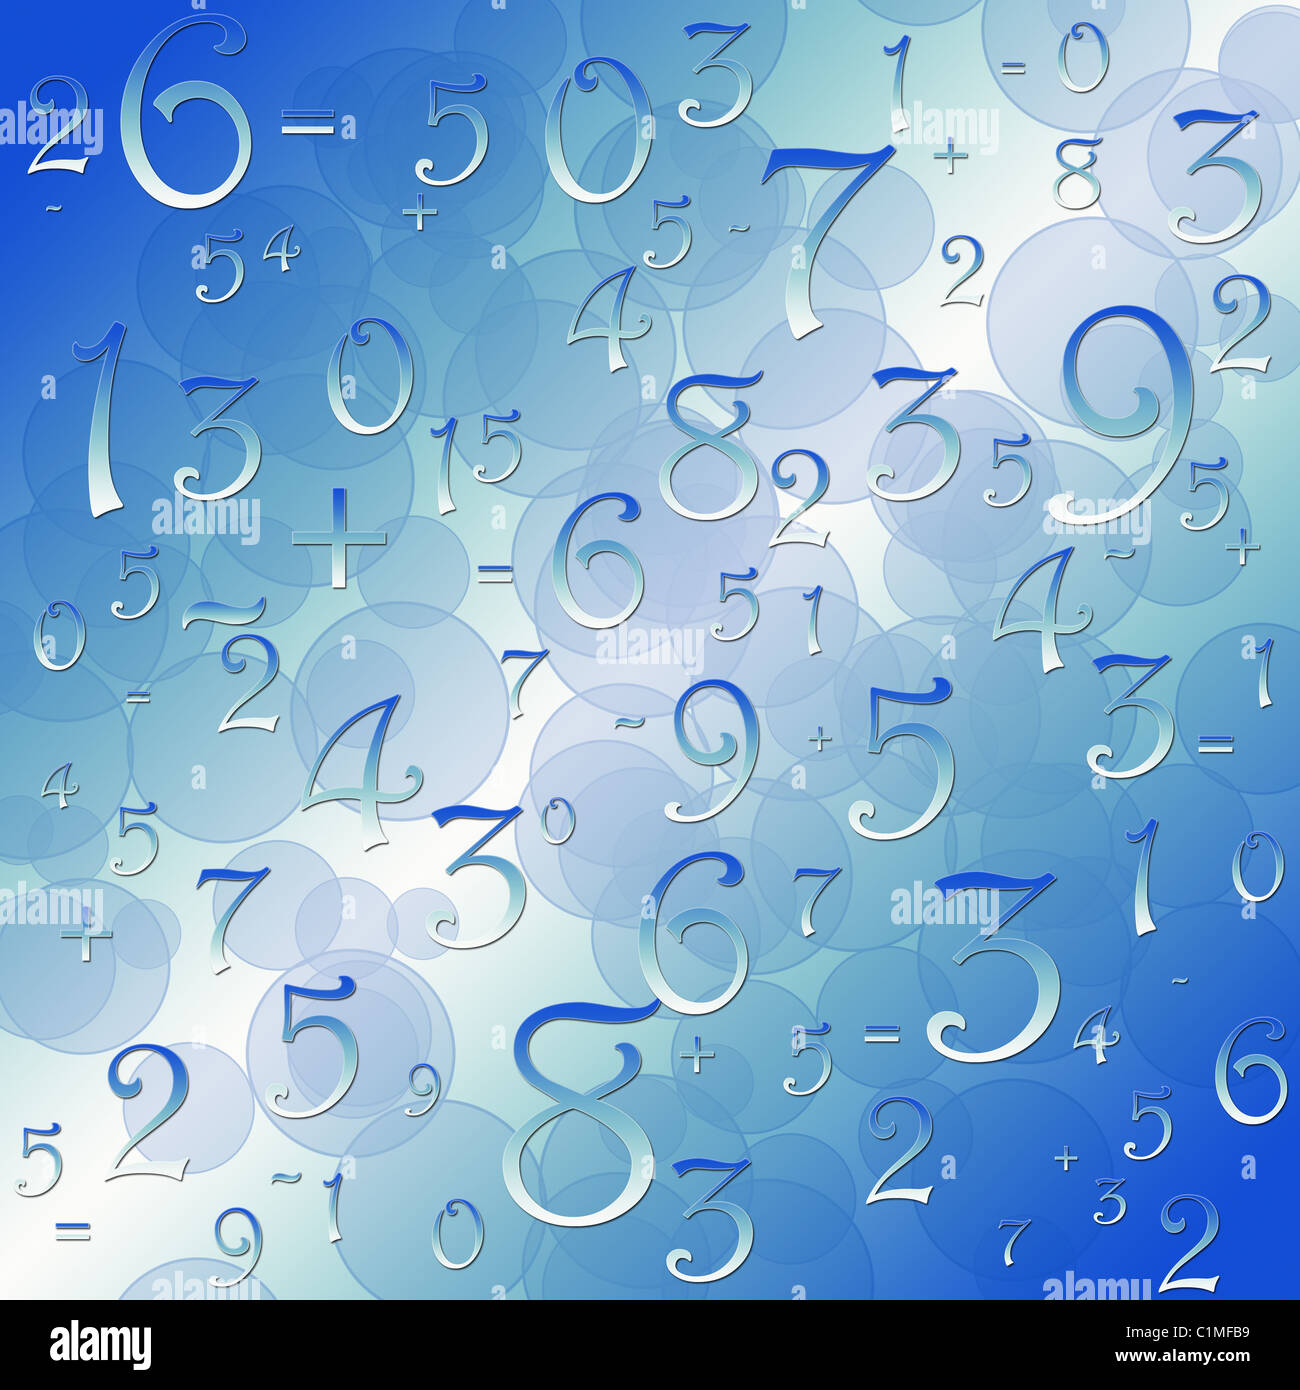 Maths numbers and signs on blue background Stock Photo - Alamy